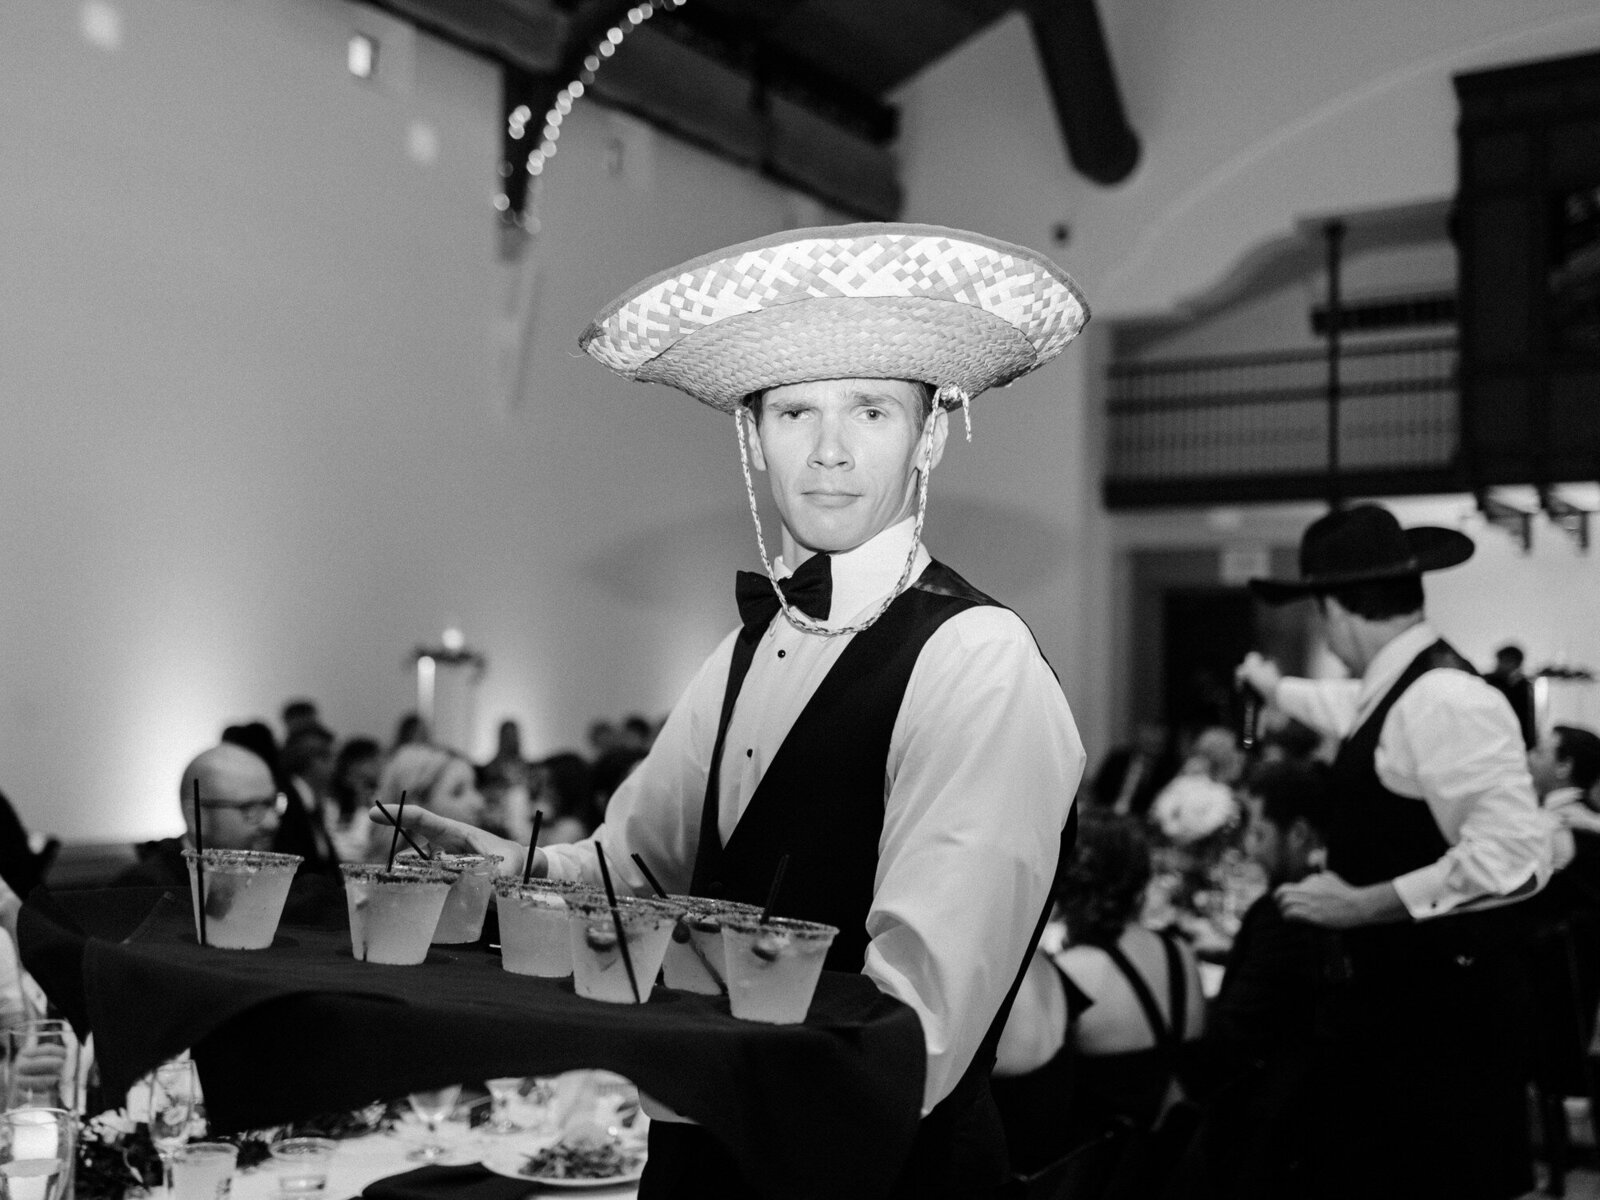 This image was taken at a wedding hosted at the McNay art museum in San Antonio, TX. One of the groomsmen walks through the reception hall carrying a tray of drinks, wearing a sombrero. He is looking straight into the camera.